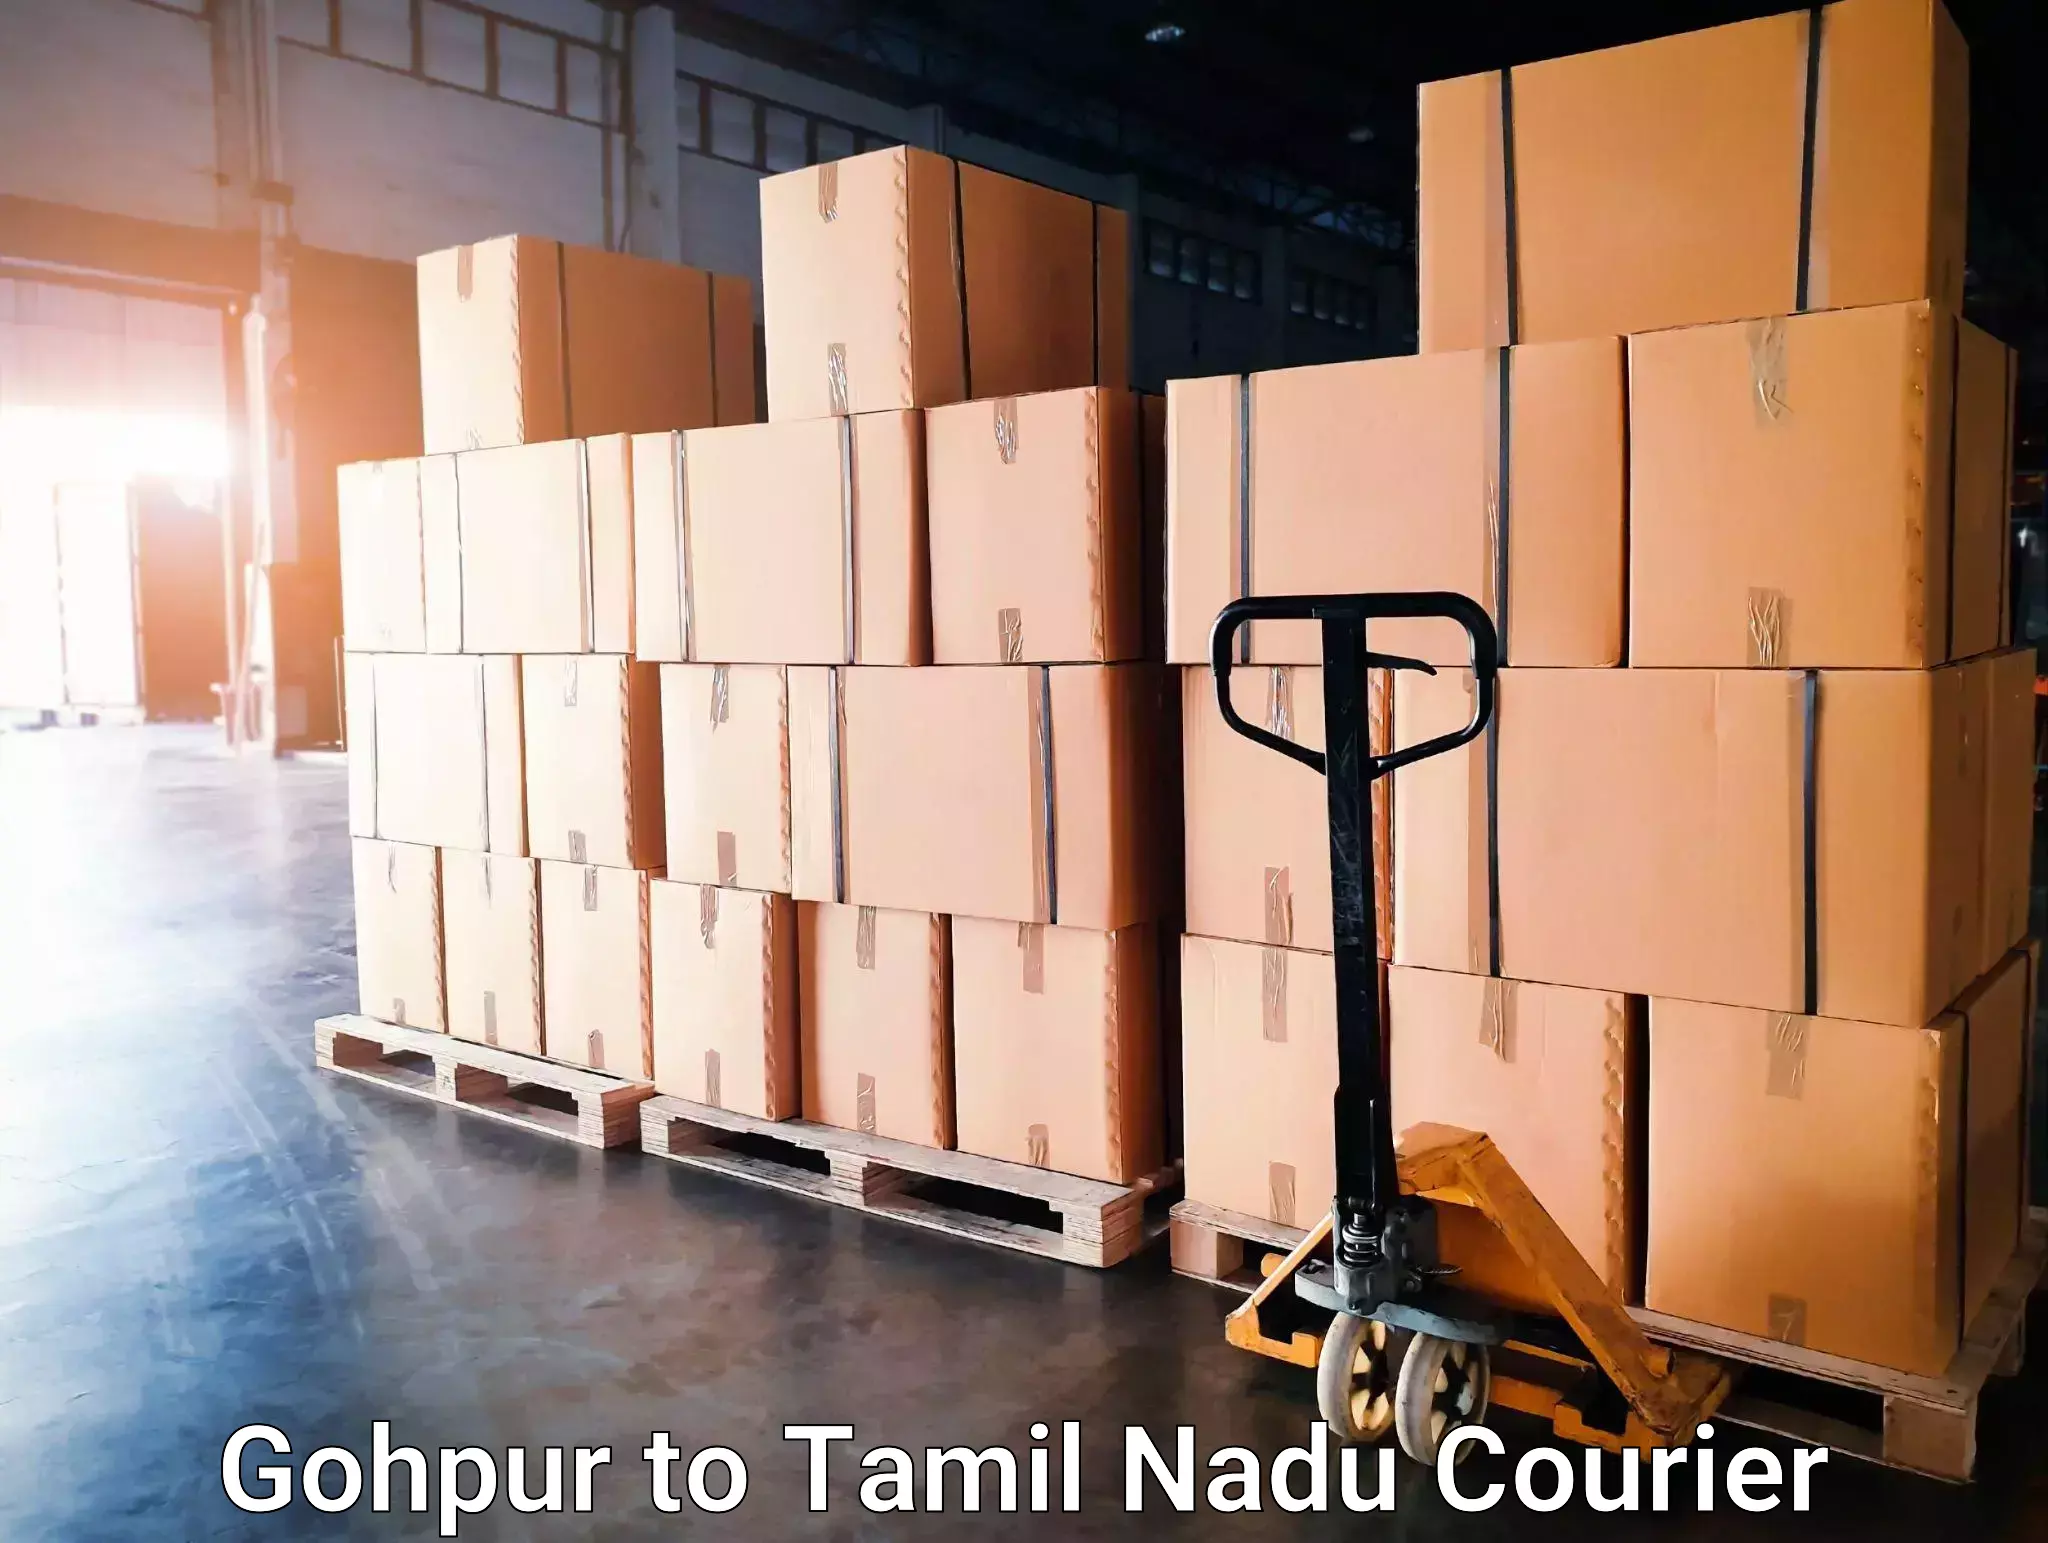 End-to-end delivery Gohpur to Tamil Nadu